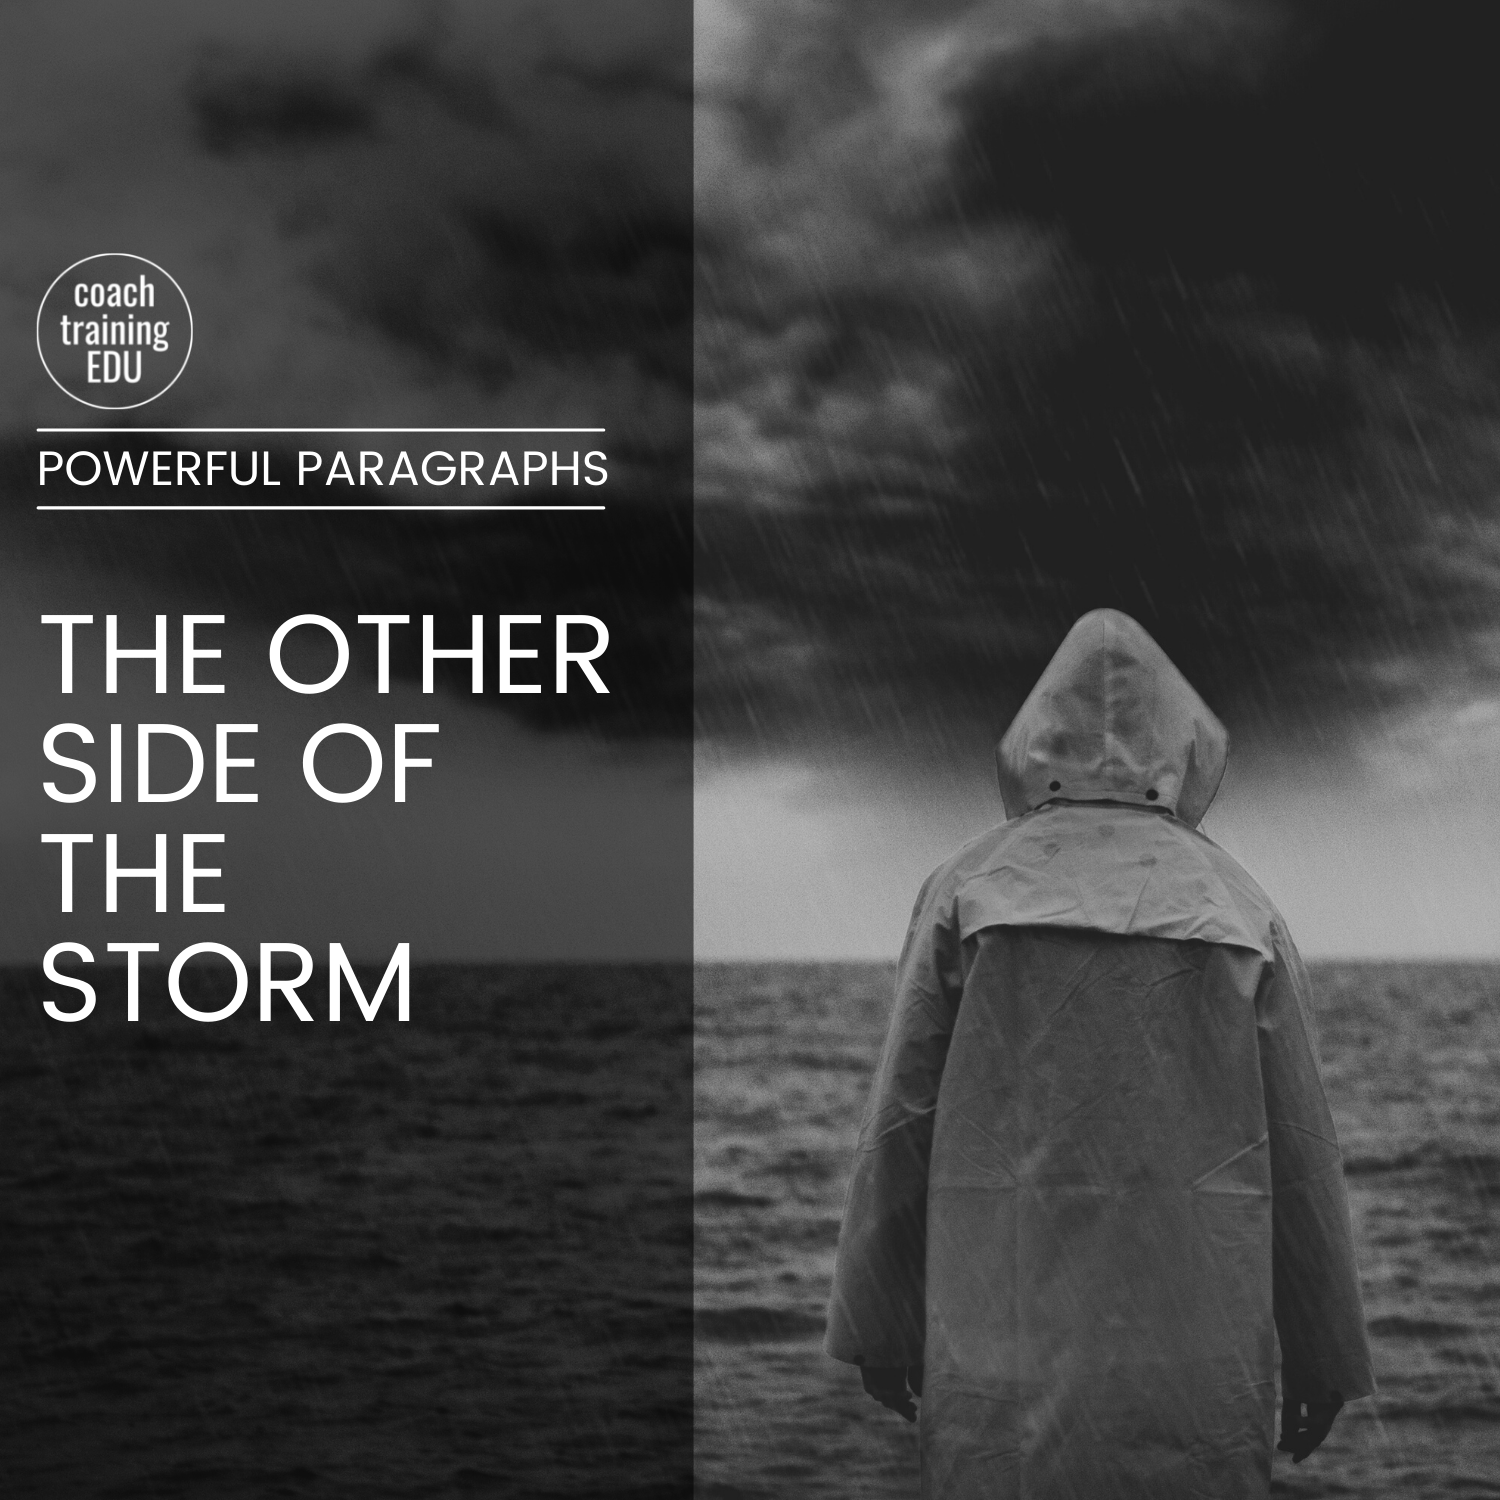 The Other Side of the Storm